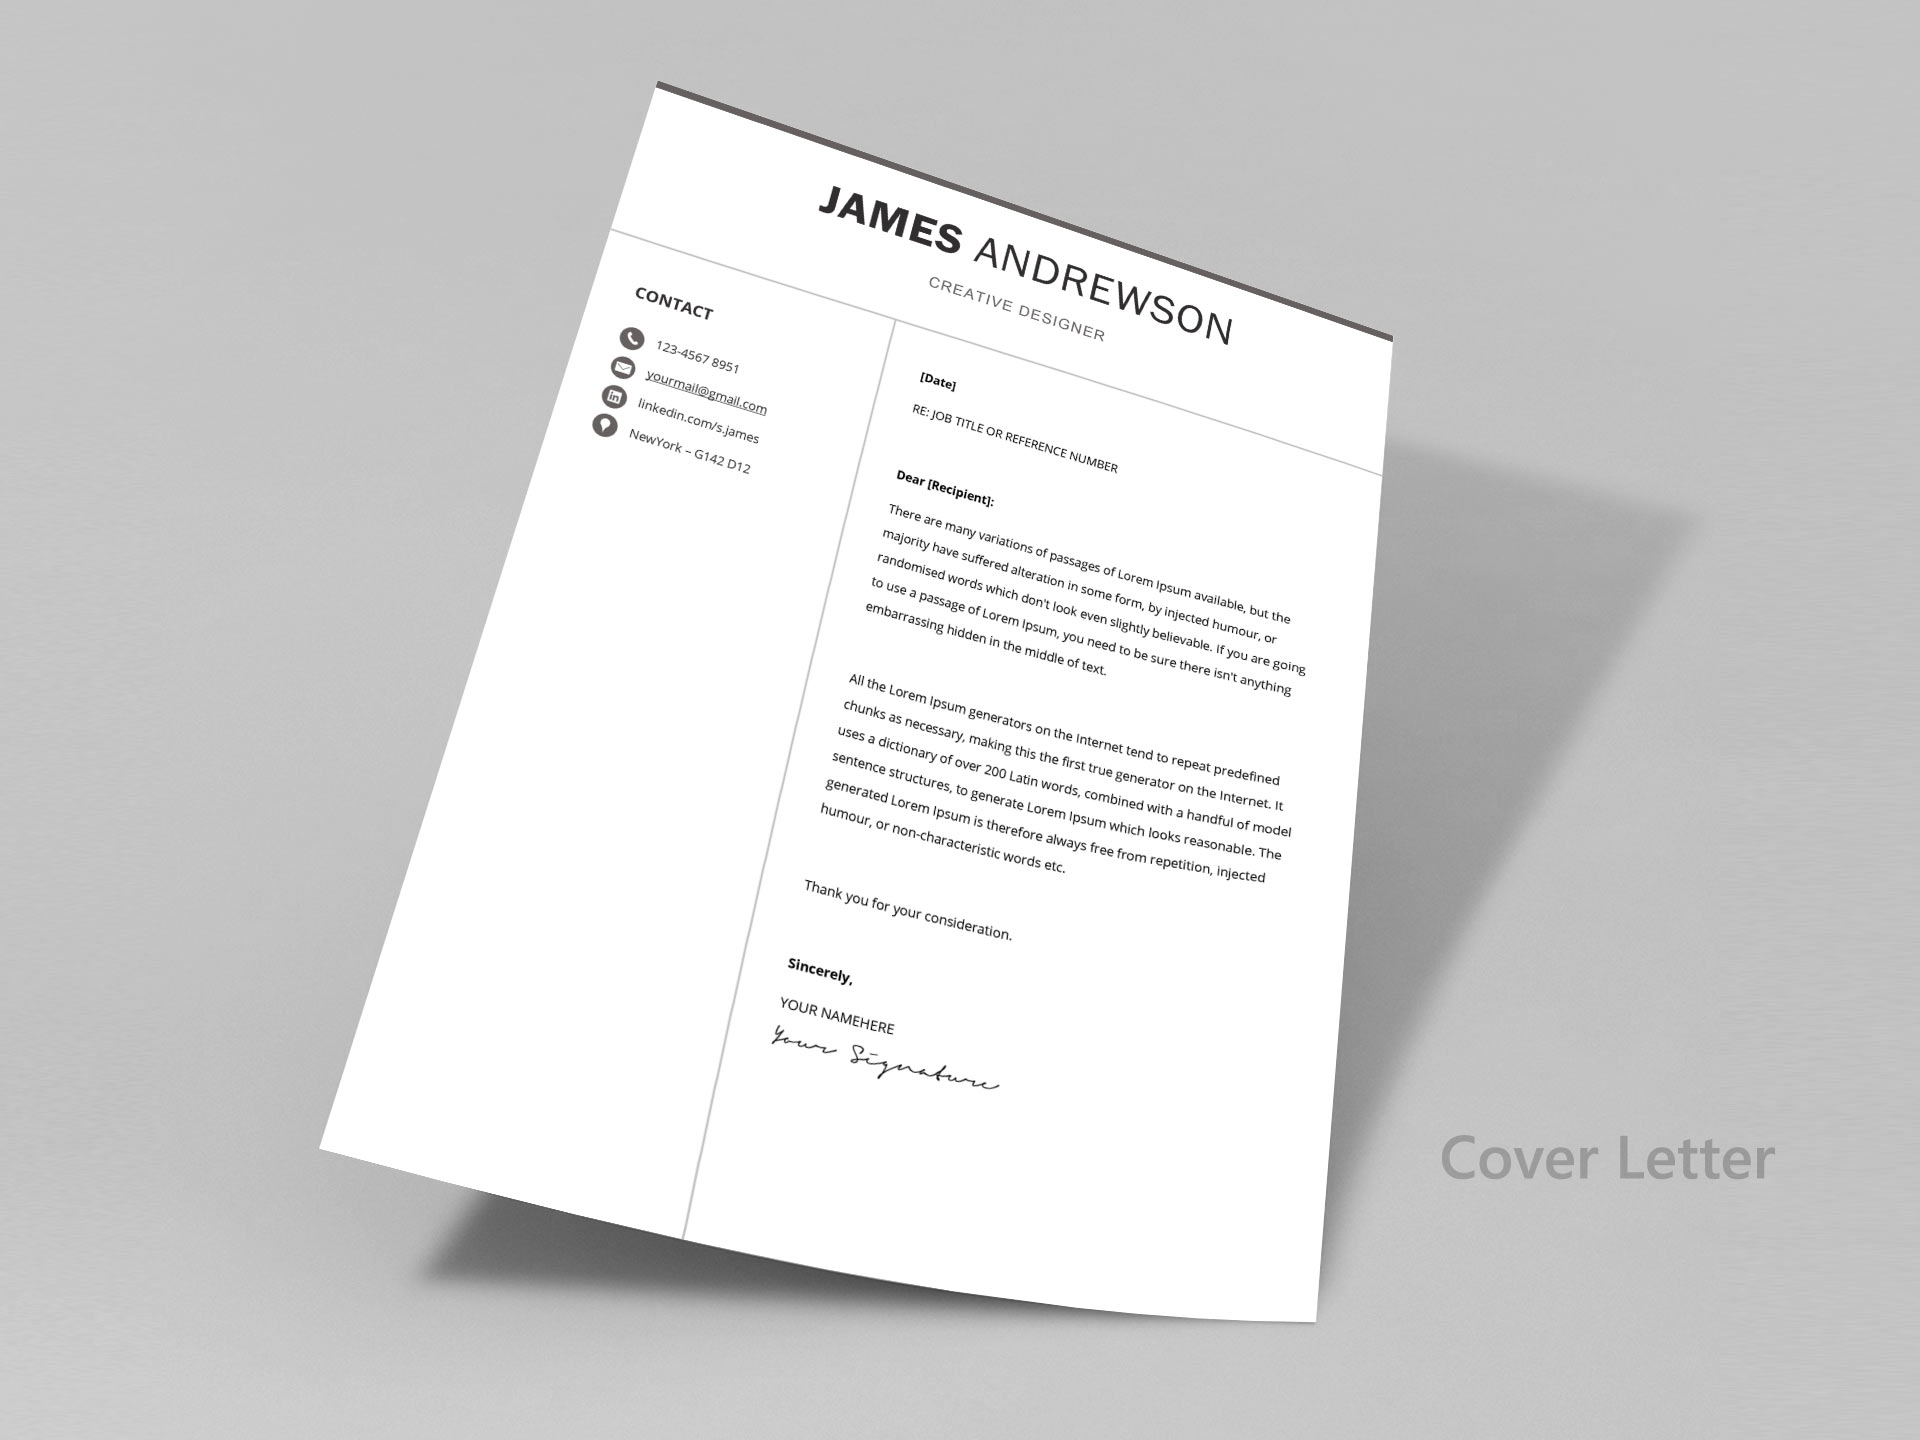 adapt-professional-cover-letter